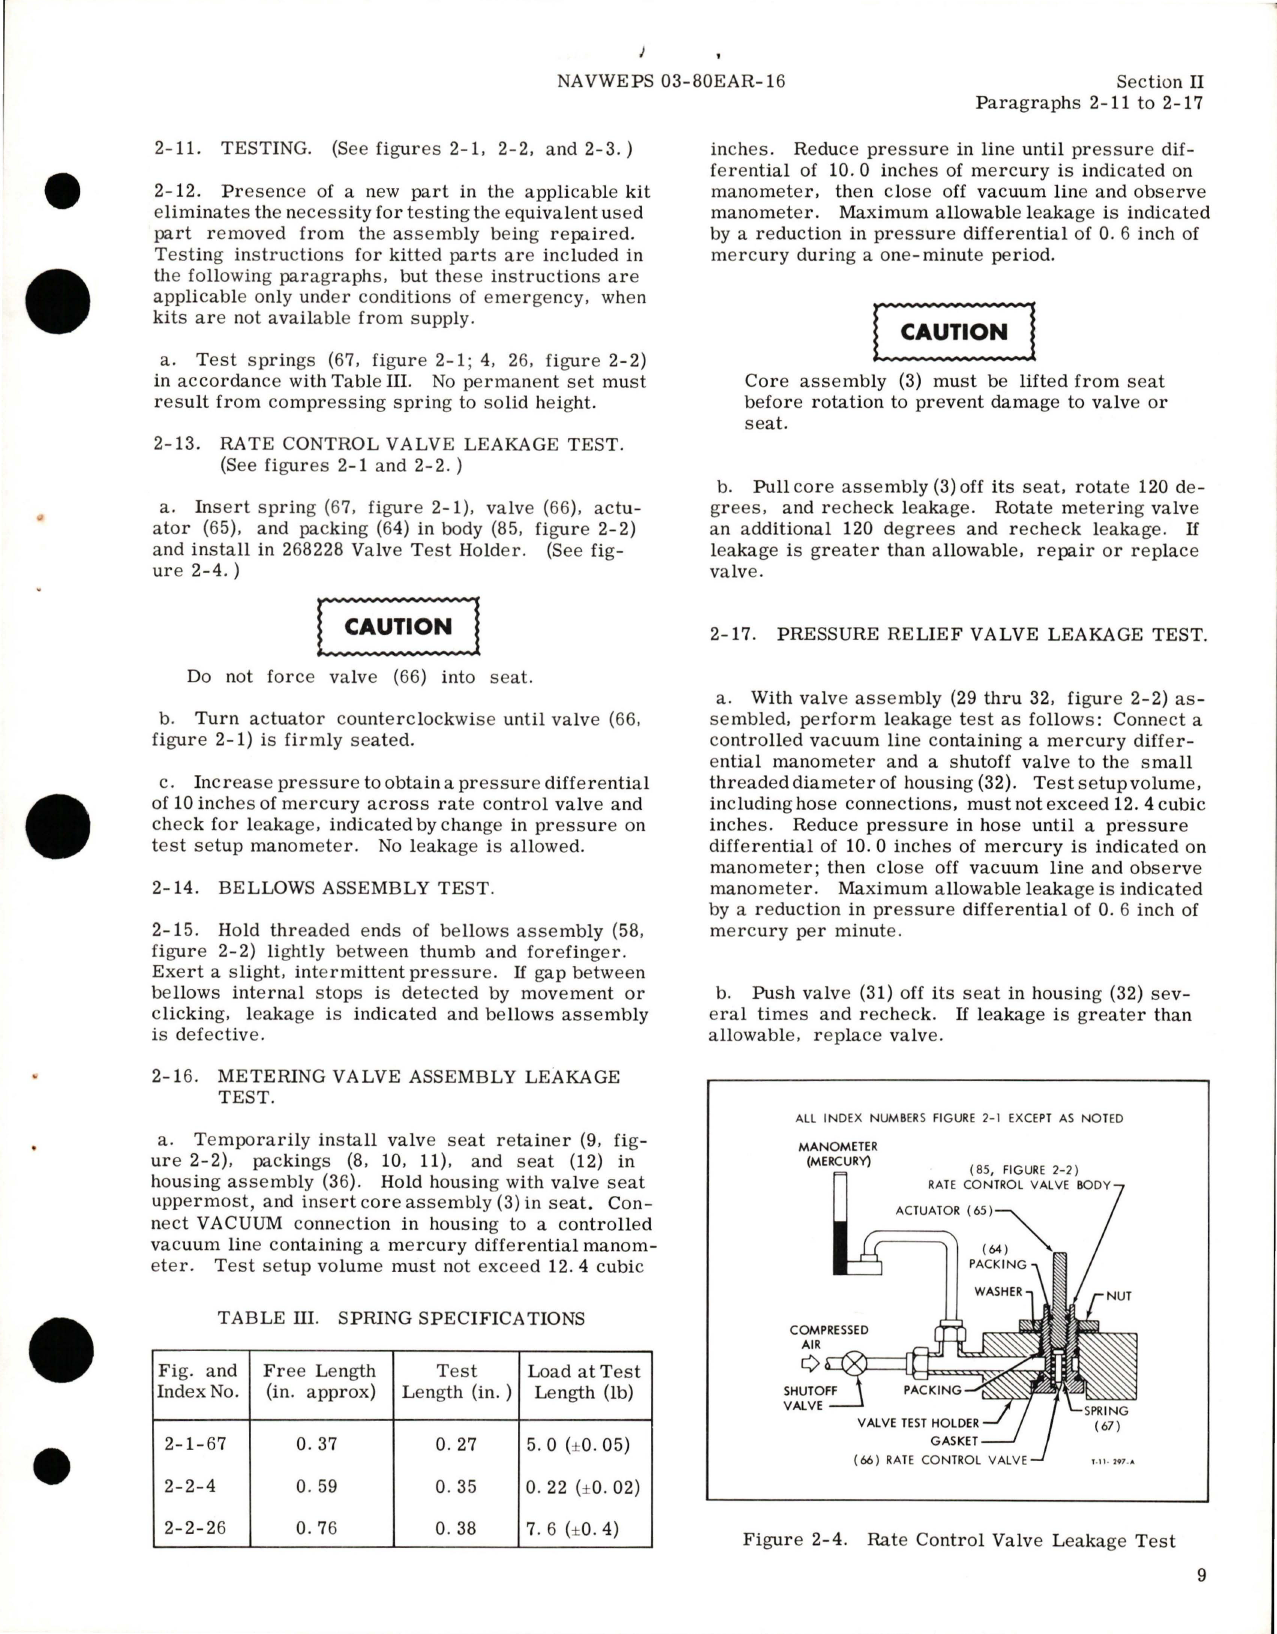 Sample page 7 from AirCorps Library document: Overhaul Instructions for Cabin Air Pressure Outflow Valve Control - Part 102210-9